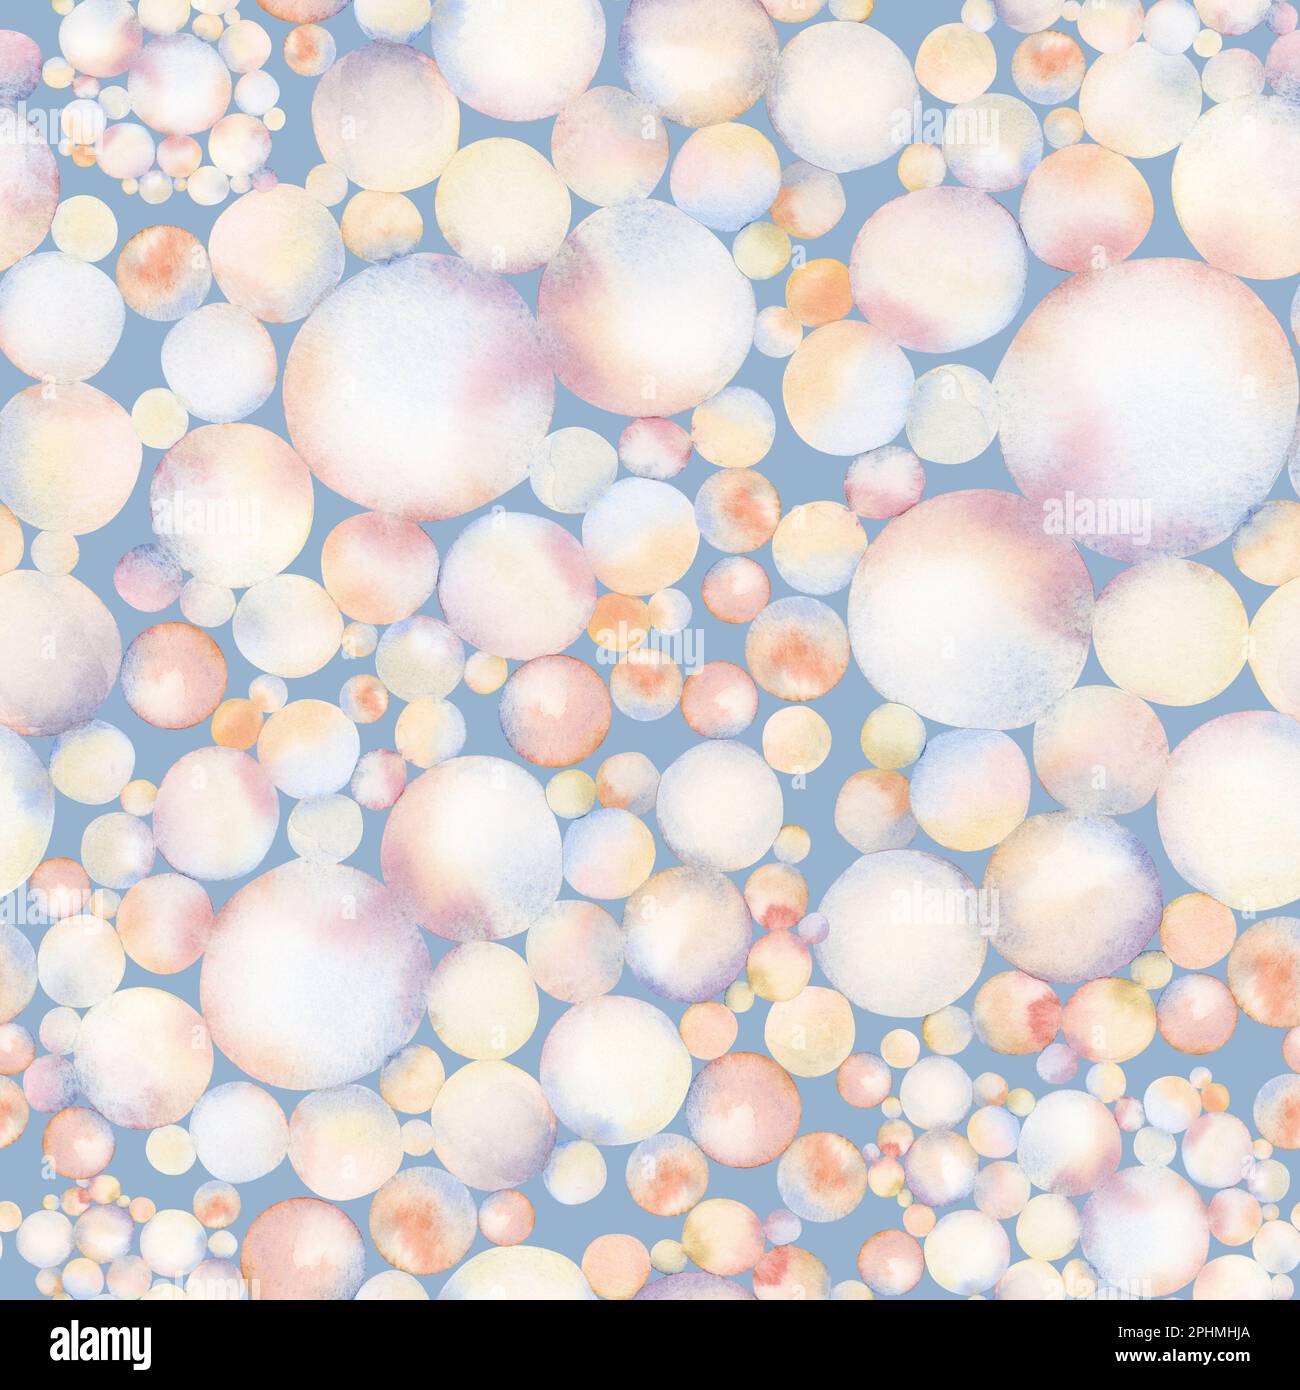 Soap bubbles seamless pattern on light blue background for kids nautical designs, textiles and fabrics. Hand drawn illustration, underwater bubbles Stock Photo